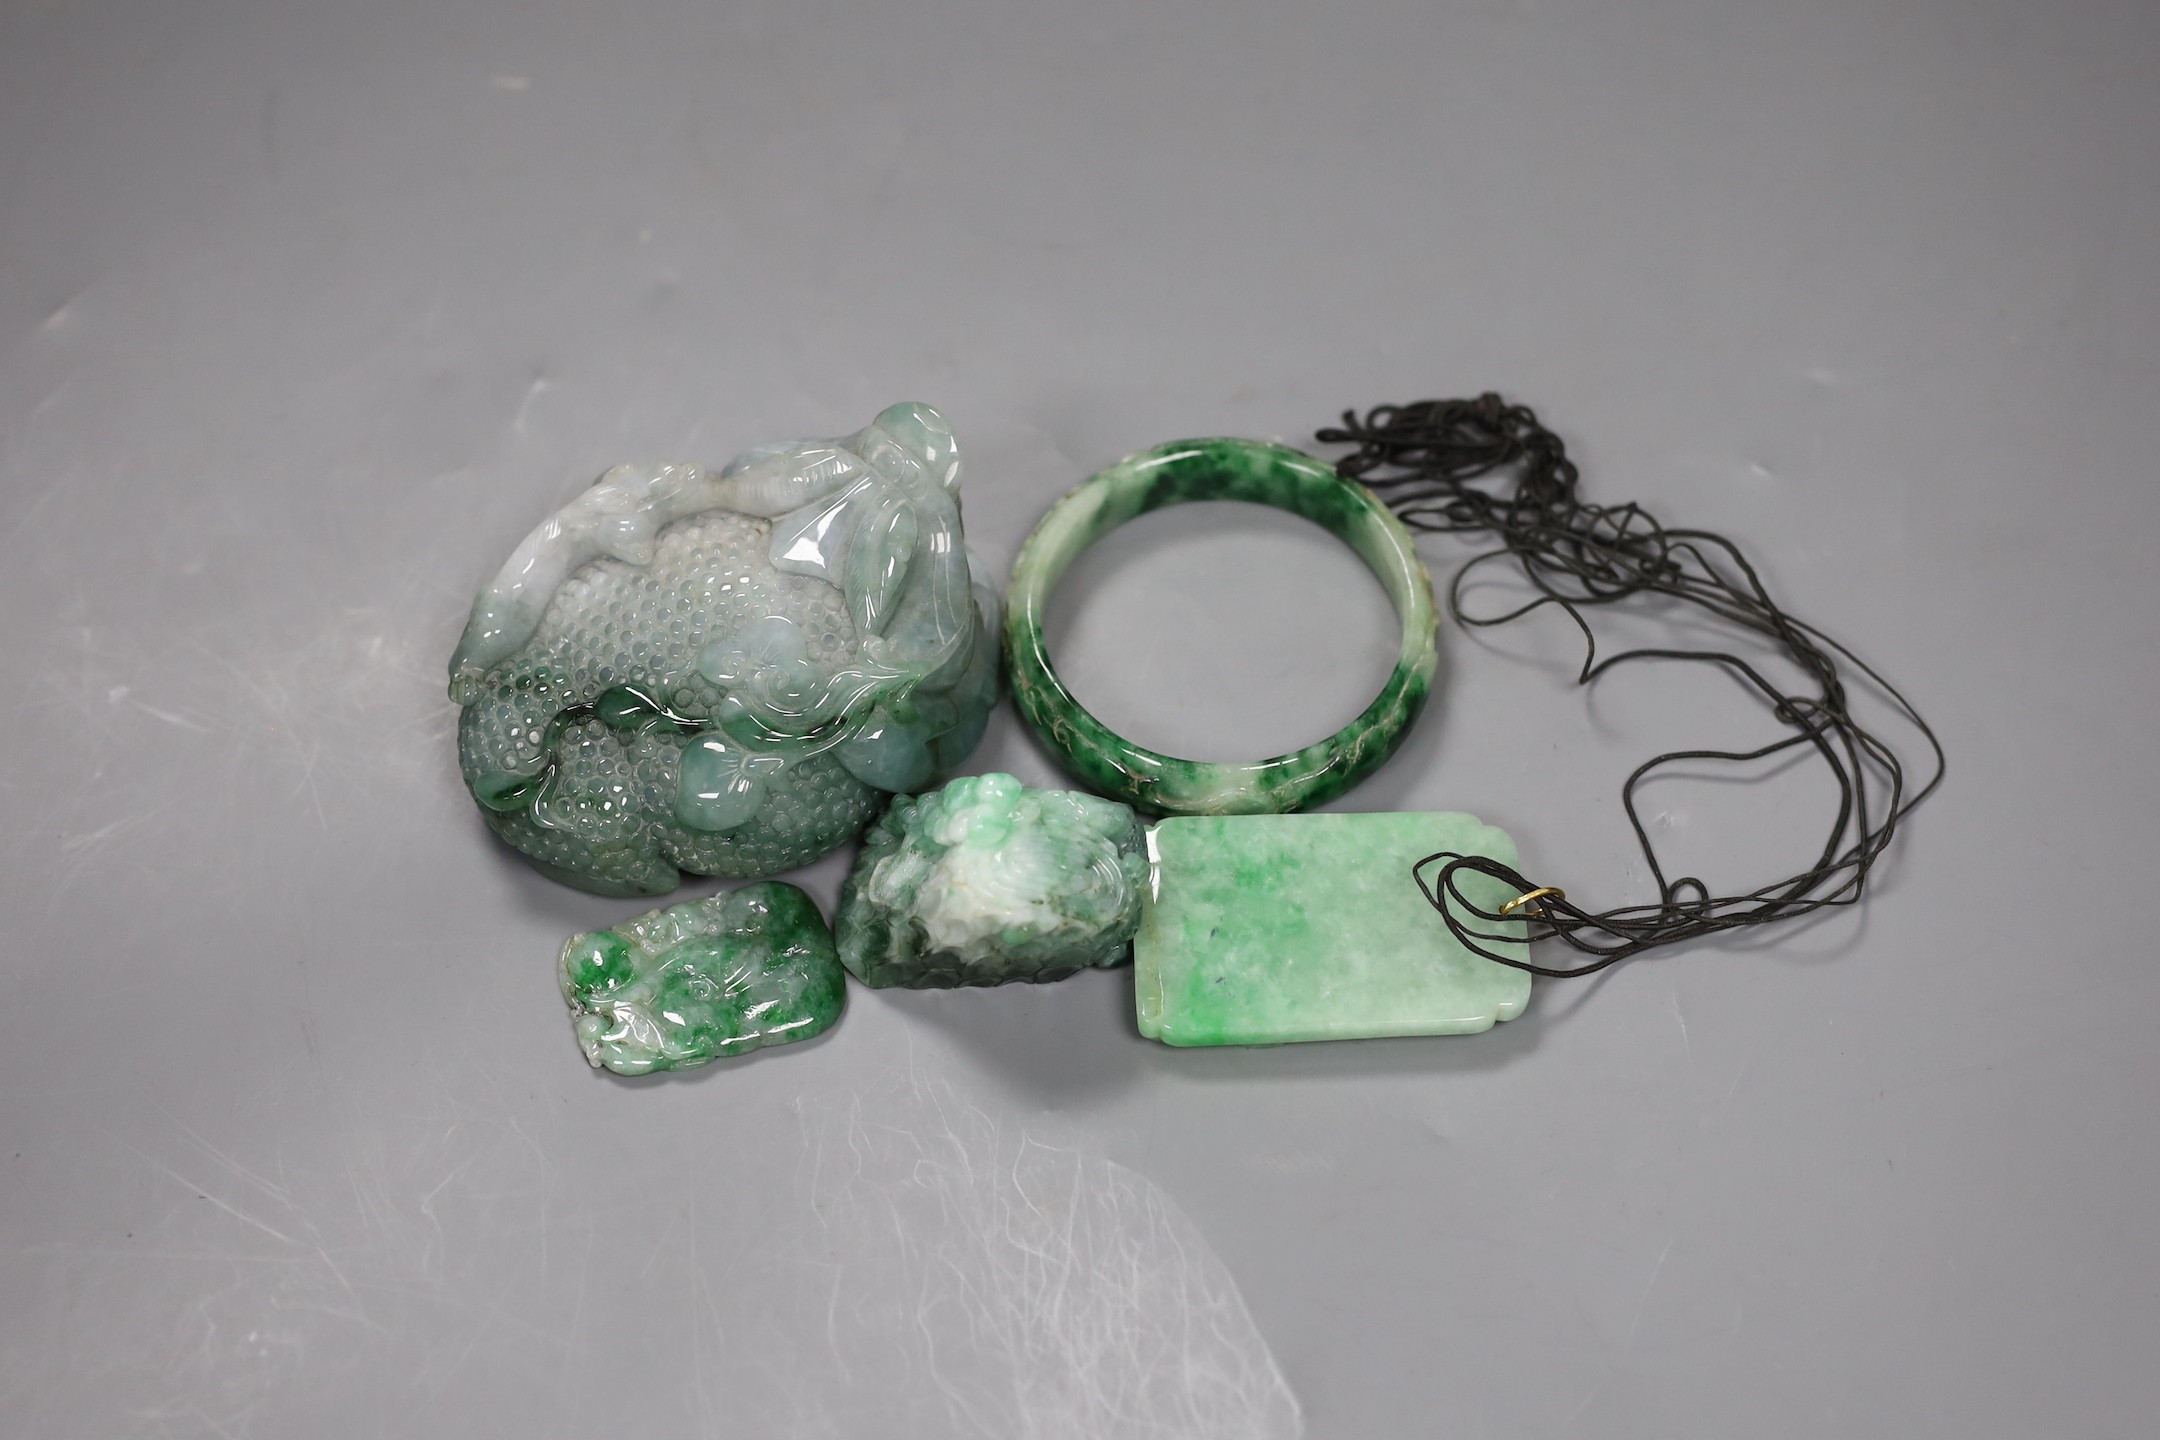 A group of five Chinese jadeite carvings, including two pendants and a bangle, largest 11cms long - Image 3 of 3